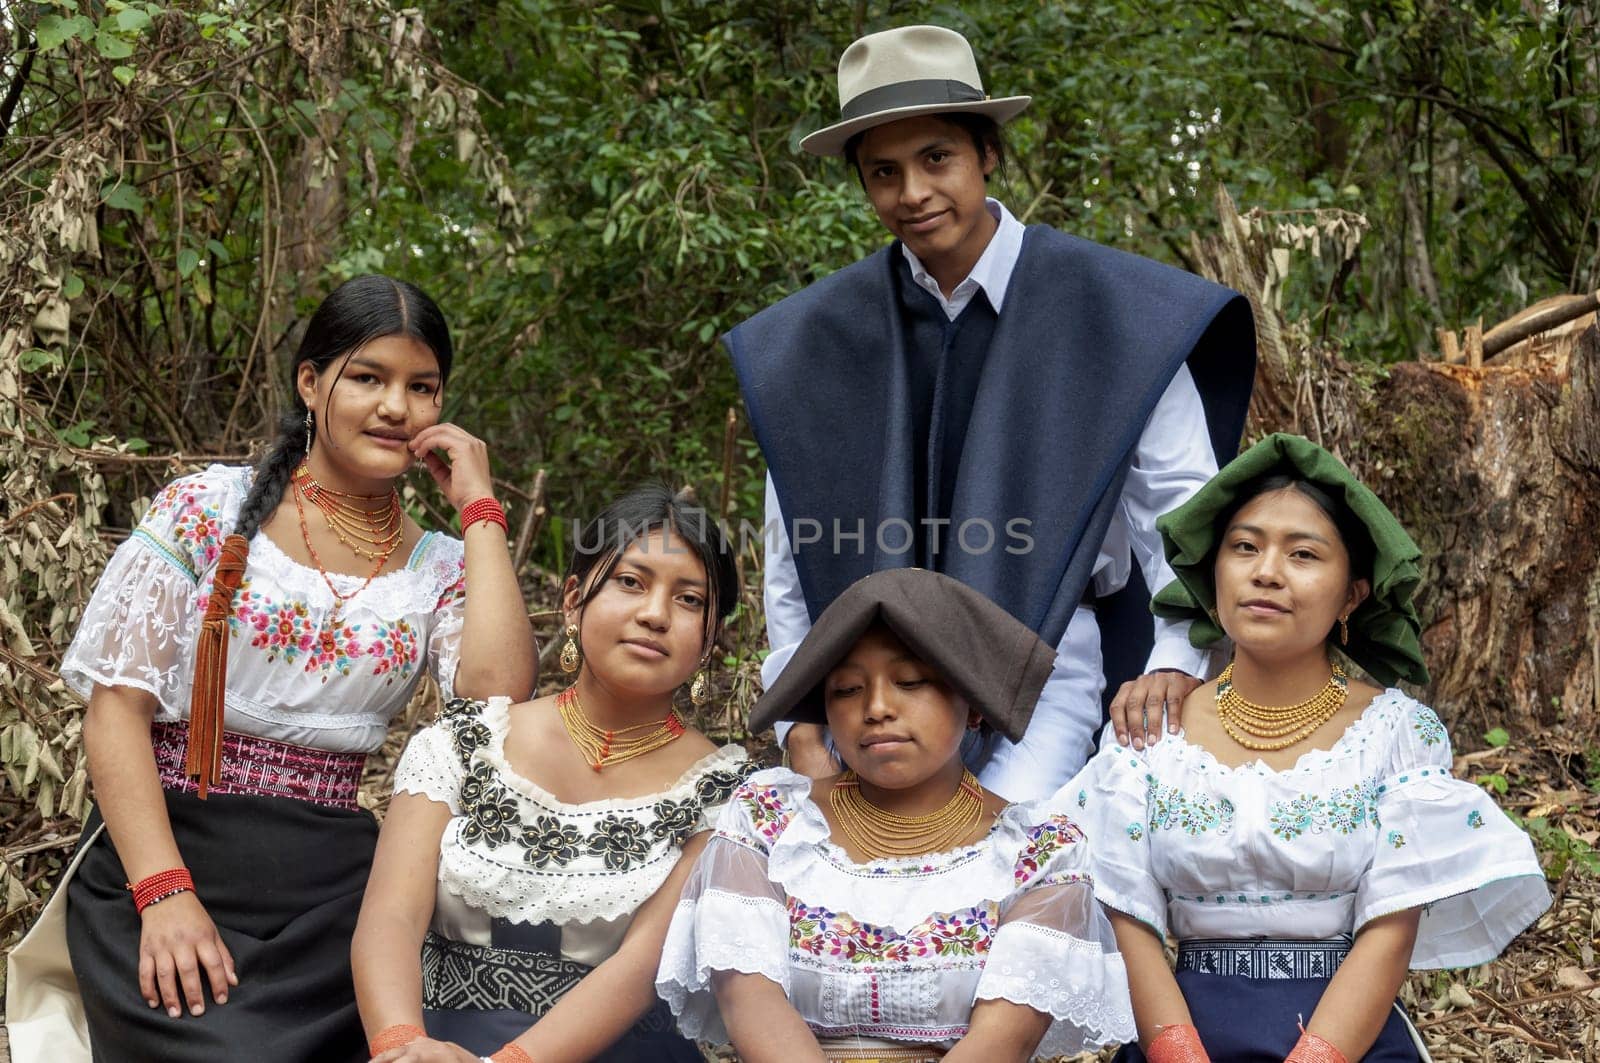 Family of five indigenous people, 4 women and a man from otavalo, ecuador with traditional by Raulmartin